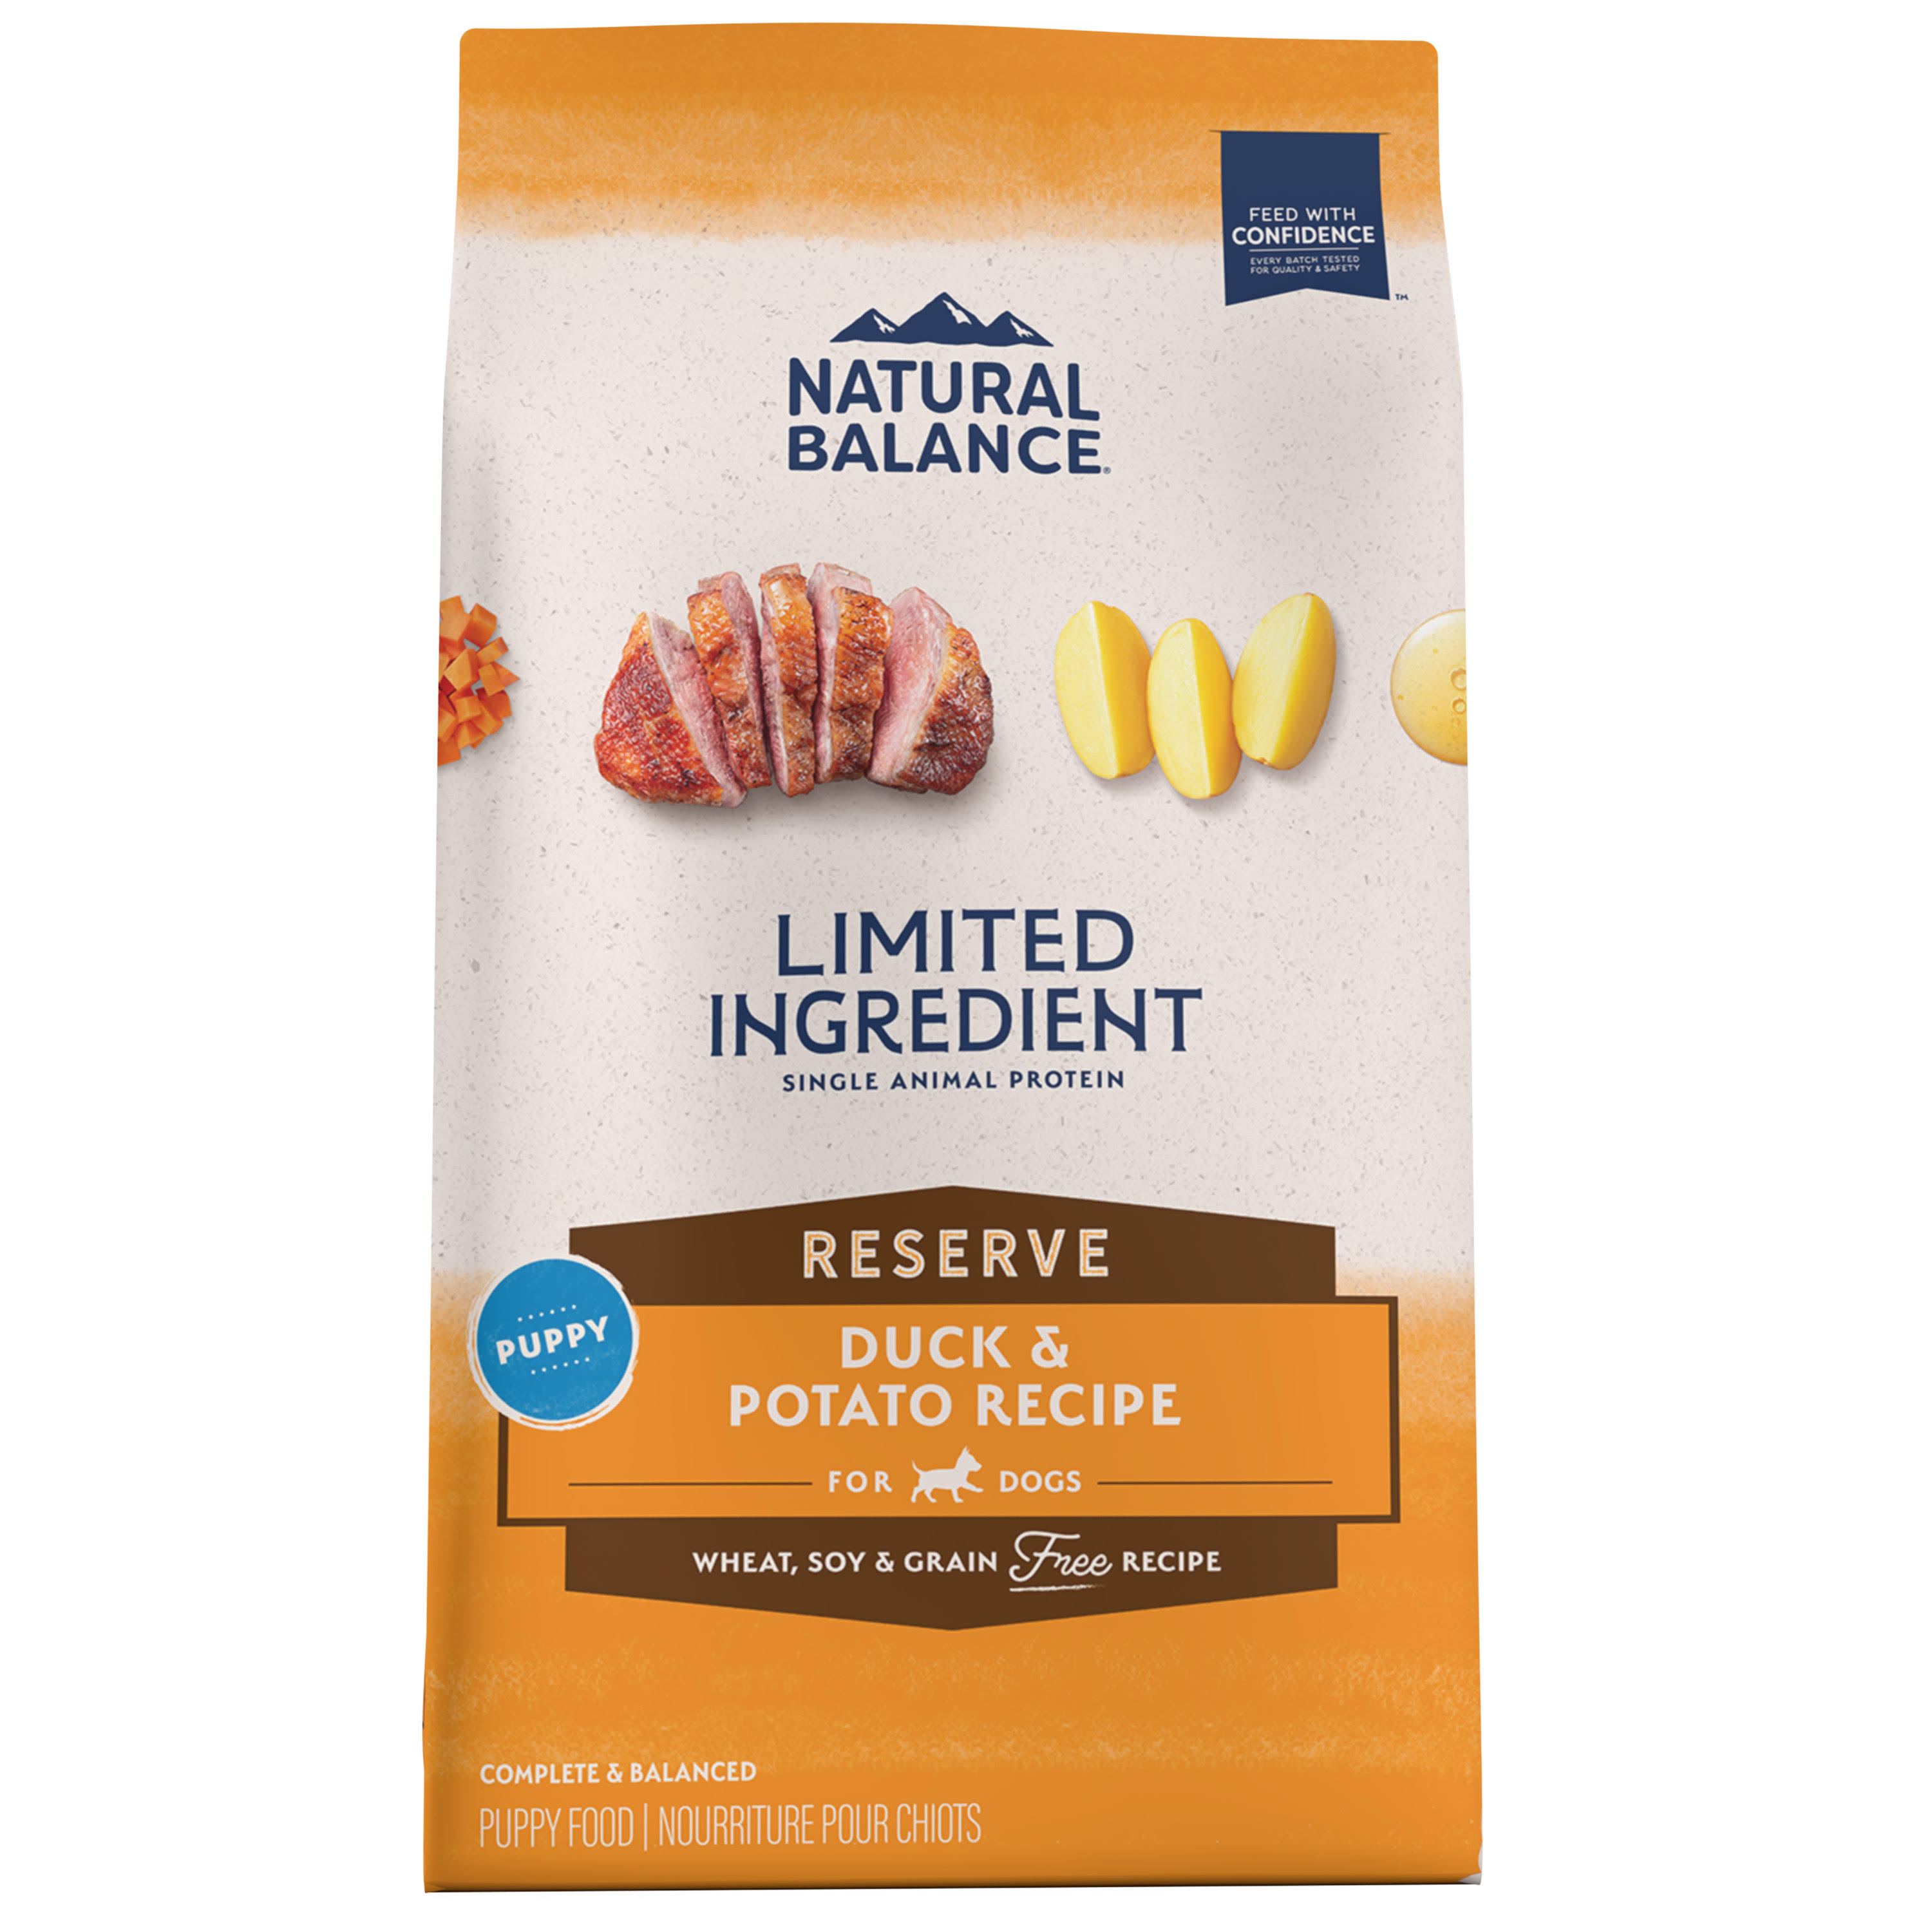 Natural Balance L.I.D. Limited Ingredient Diets Grain Free Duck & Potato Formula Puppy Dry Dog Food